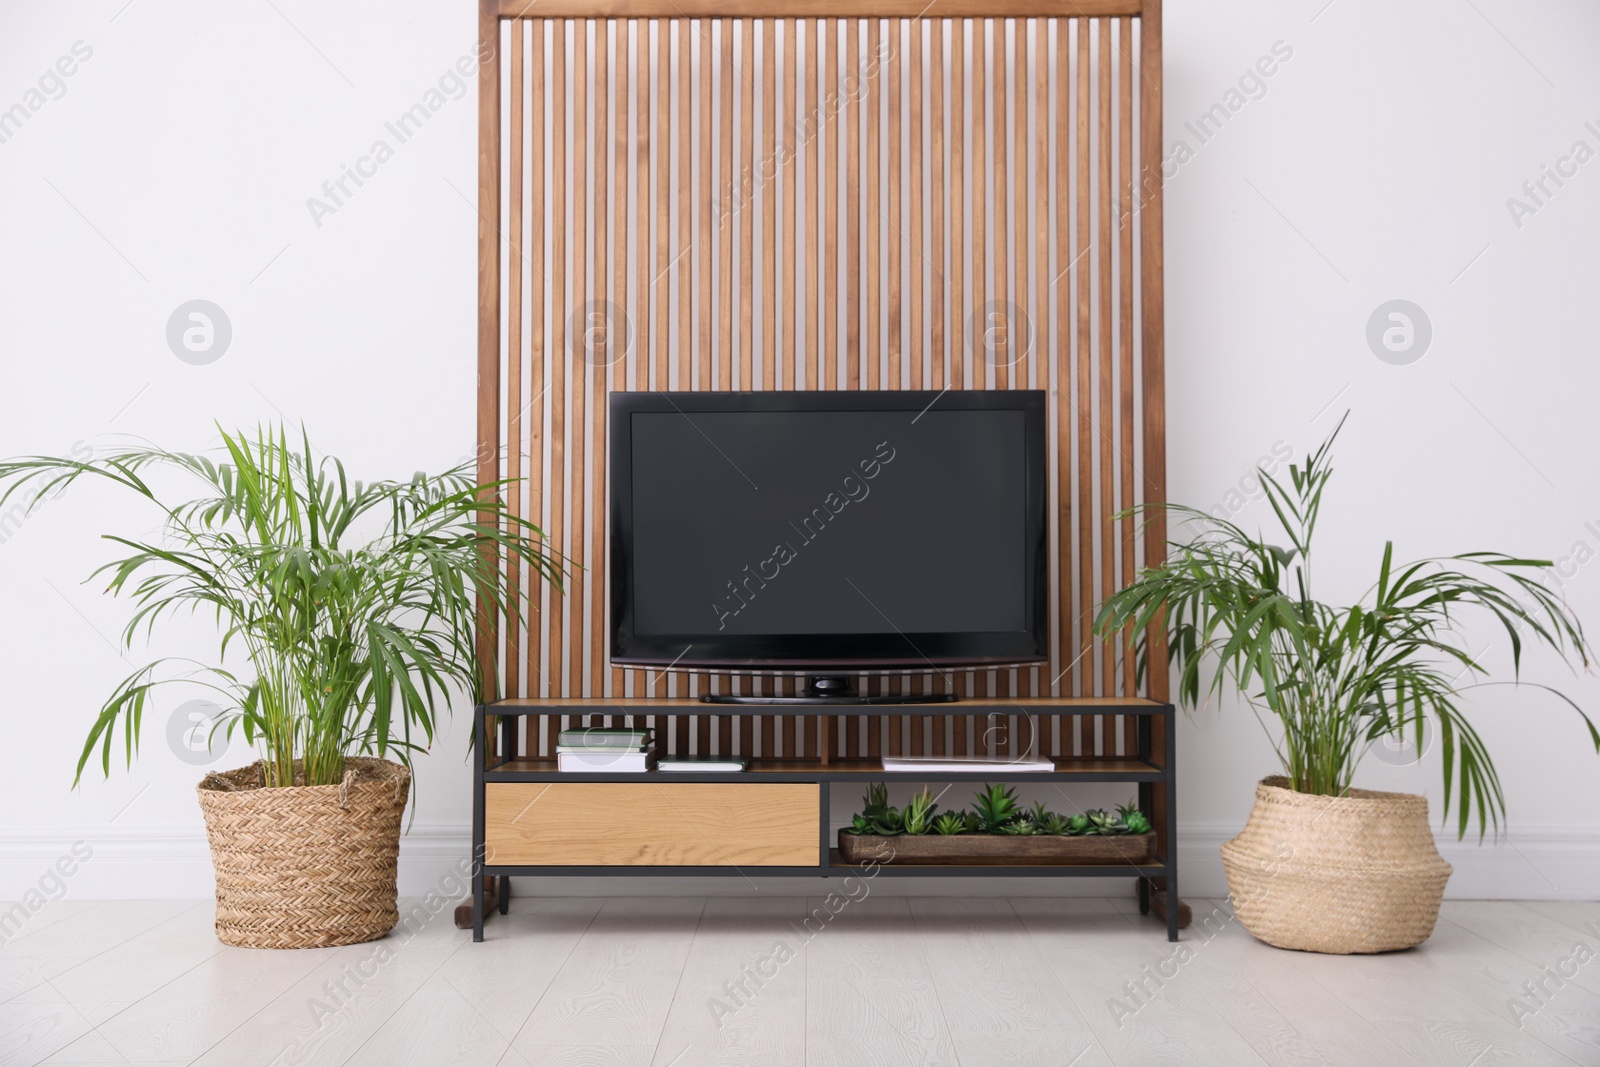 Photo of Elegant room interior with modern TV on cabinet and beautiful houseplants